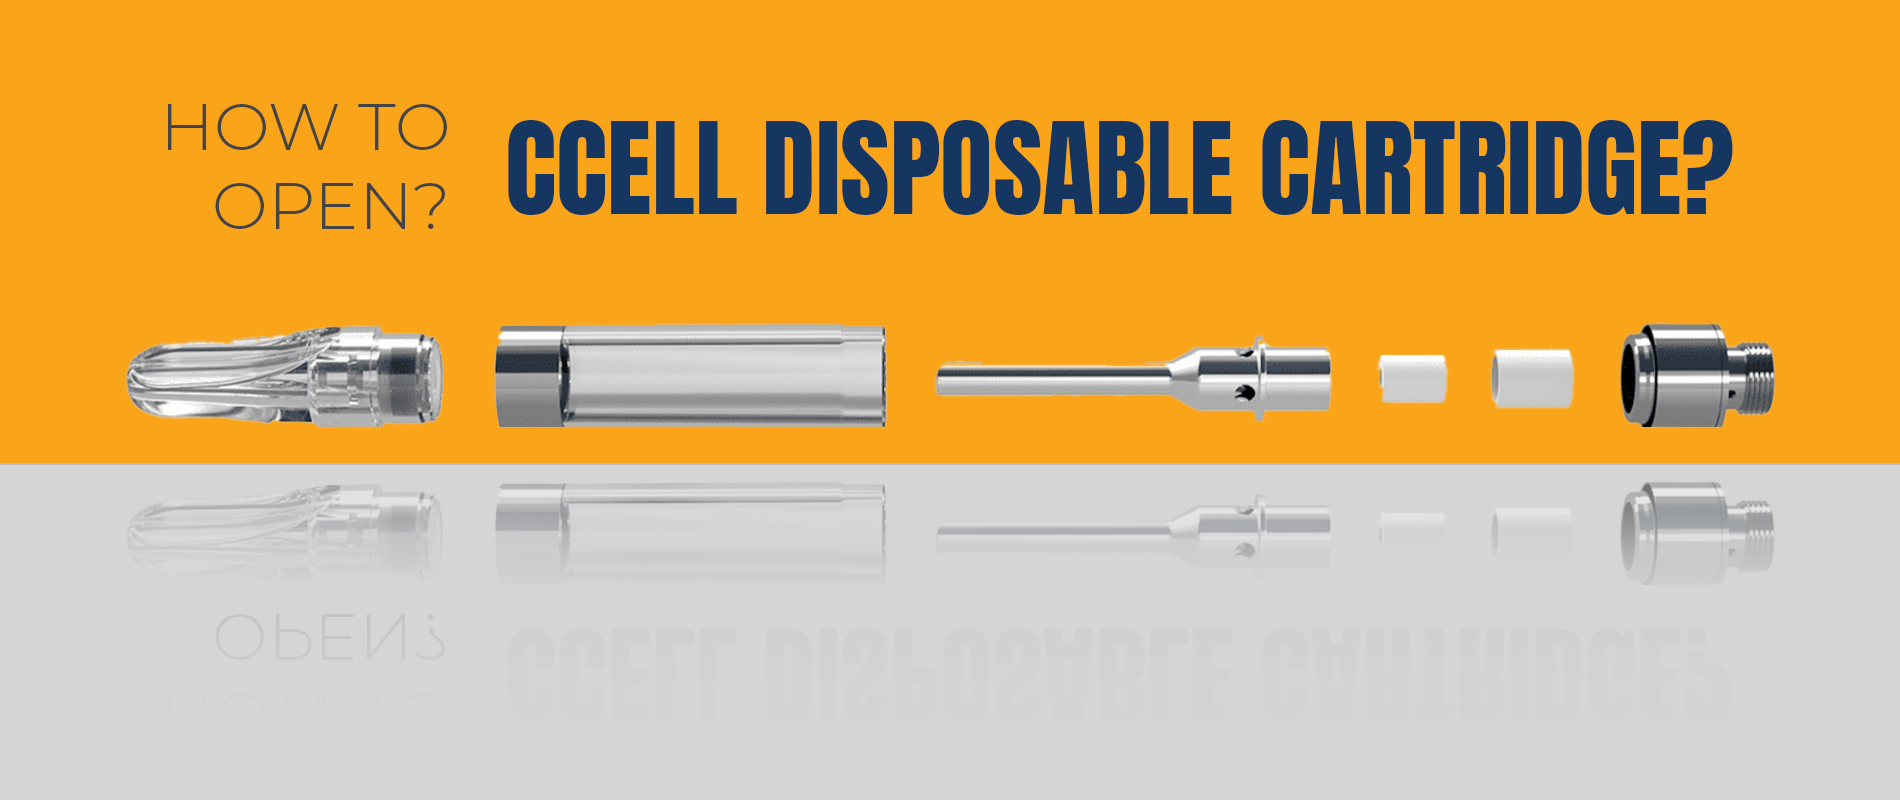 CCELL Disposable Cartridges